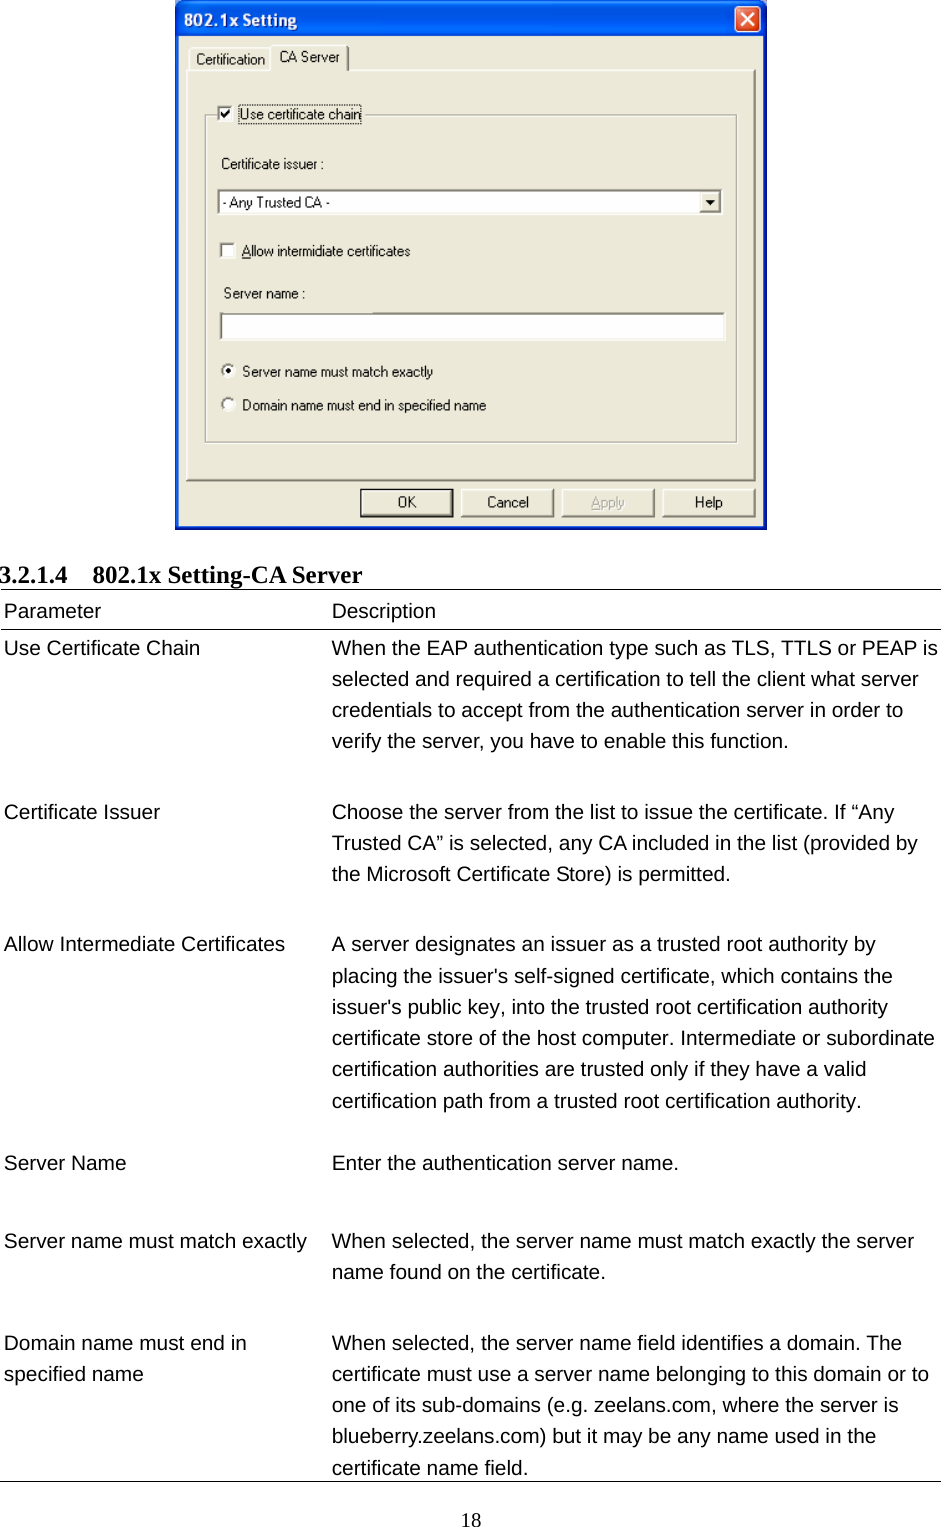  18   3.2.1.4  802.1x Setting-CA Server Parameter Description Use Certificate Chain  When the EAP authentication type such as TLS, TTLS or PEAP is selected and required a certification to tell the client what server credentials to accept from the authentication server in order to verify the server, you have to enable this function.   Certificate Issuer  Choose the server from the list to issue the certificate. If “Any Trusted CA” is selected, any CA included in the list (provided by the Microsoft Certificate Store) is permitted.   Allow Intermediate Certificates  A server designates an issuer as a trusted root authority by placing the issuer&apos;s self-signed certificate, which contains the issuer&apos;s public key, into the trusted root certification authority certificate store of the host computer. Intermediate or subordinate certification authorities are trusted only if they have a valid certification path from a trusted root certification authority.    Server Name  Enter the authentication server name.   Server name must match exactly  When selected, the server name must match exactly the server name found on the certificate.     Domain name must end in specified name When selected, the server name field identifies a domain. The certificate must use a server name belonging to this domain or to one of its sub-domains (e.g. zeelans.com, where the server is blueberry.zeelans.com) but it may be any name used in the certificate name field. 